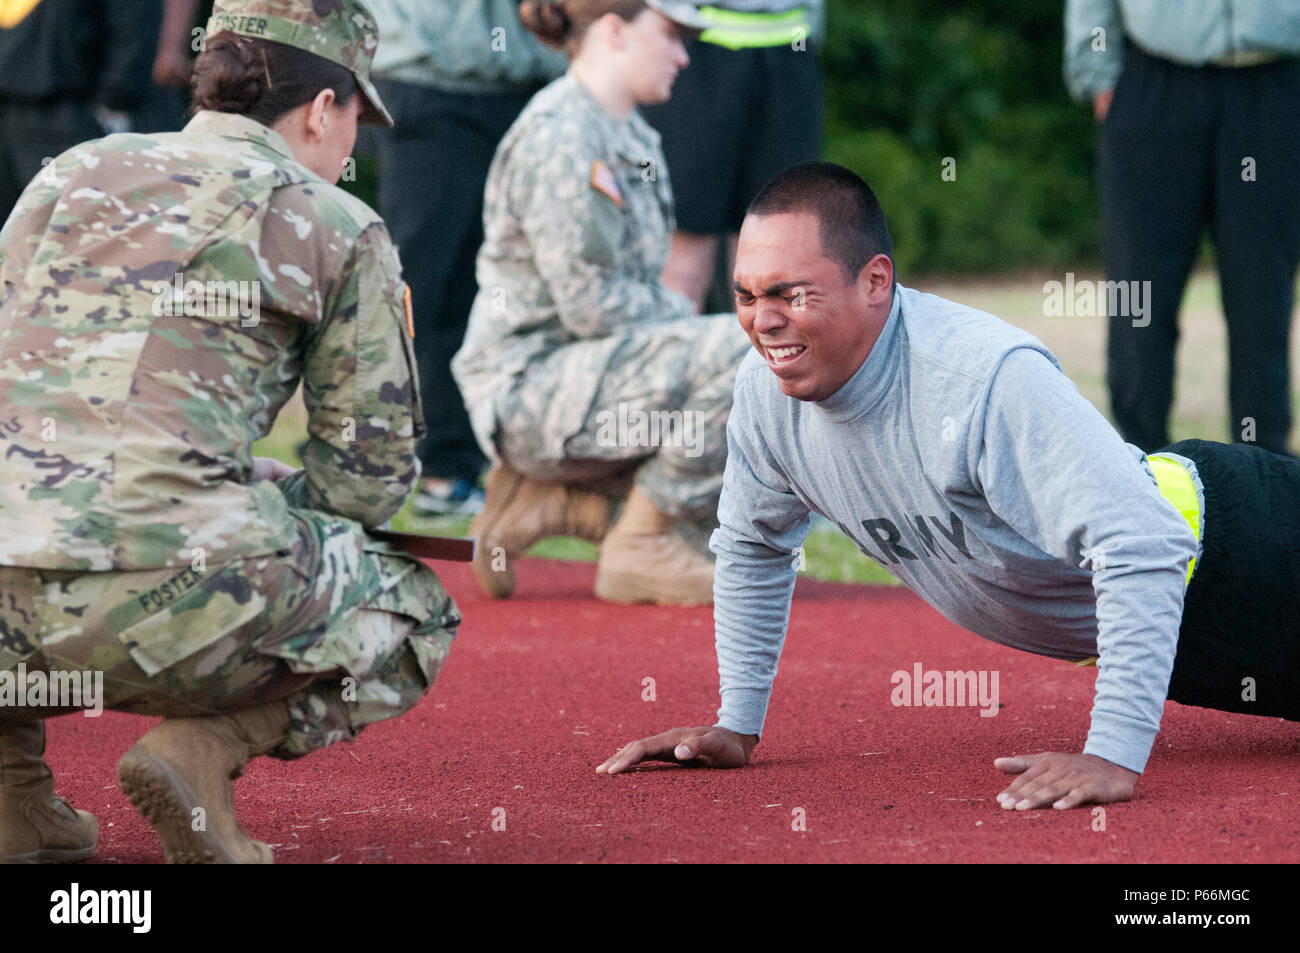 U.S. Army Sgt. Trinidad Escobedo, with the 230th Brigade Support Battalion, 30th Armored Brigade Combat Team, performs pushups during an Army physical fitness test as part of the 30th ABCT’s Inaugural Hickory Cup at Fort Bragg, North Carolina, May 7, 2016.  The Hickory Cup was modeled after the Sullivan Cup, a world-class physically and mentally demanding competition that rigorously tests U.S. Army Soldiers, U.S. Marines and international partners in tank crew maneuver, sustainment and gunnery skills. (U.S. Army National Guard photo by Staff Sgt. Jonathan Shaw, 382nd Public Affairs Detachment/ Stock Photo